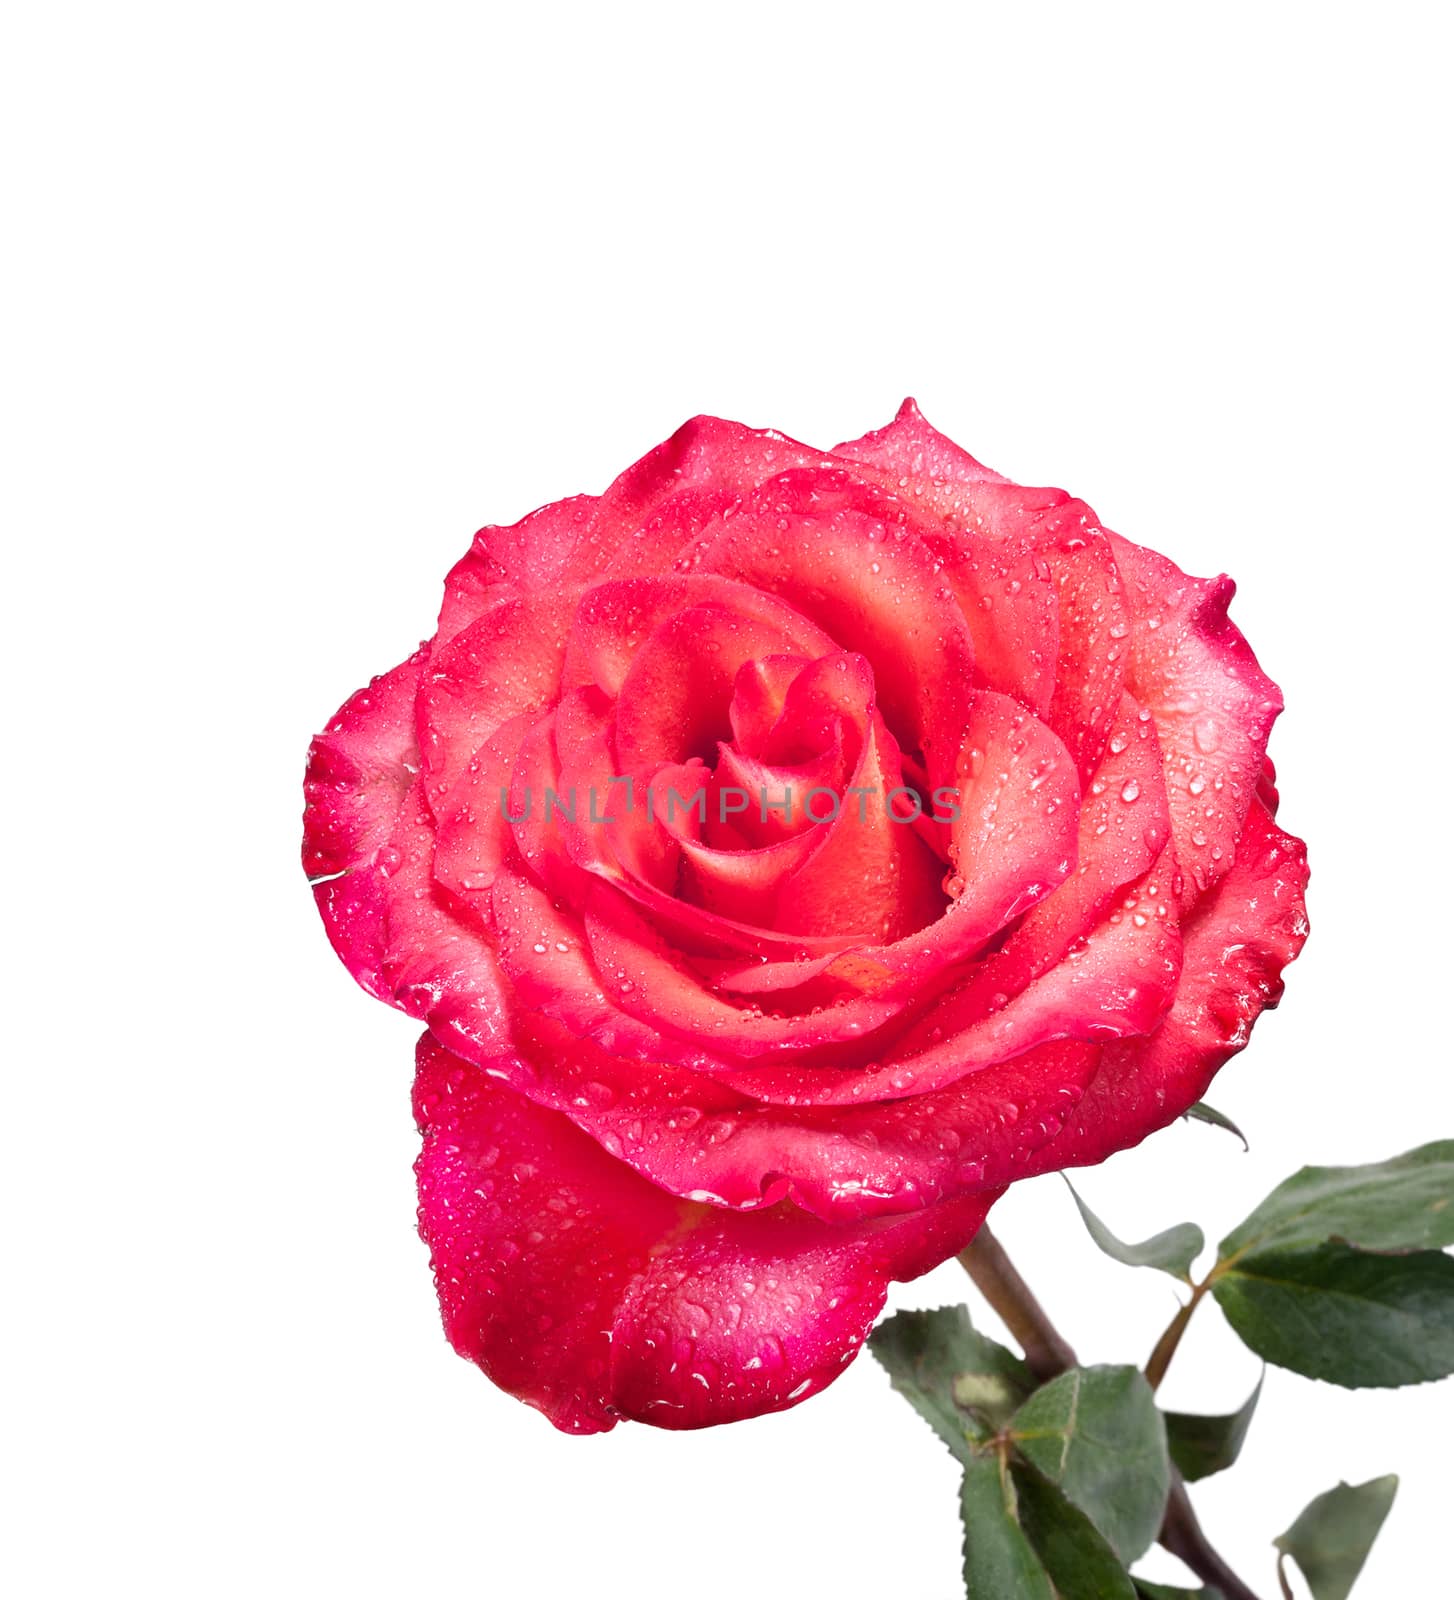 Single red rose isolated on the white background by BIG_TAU